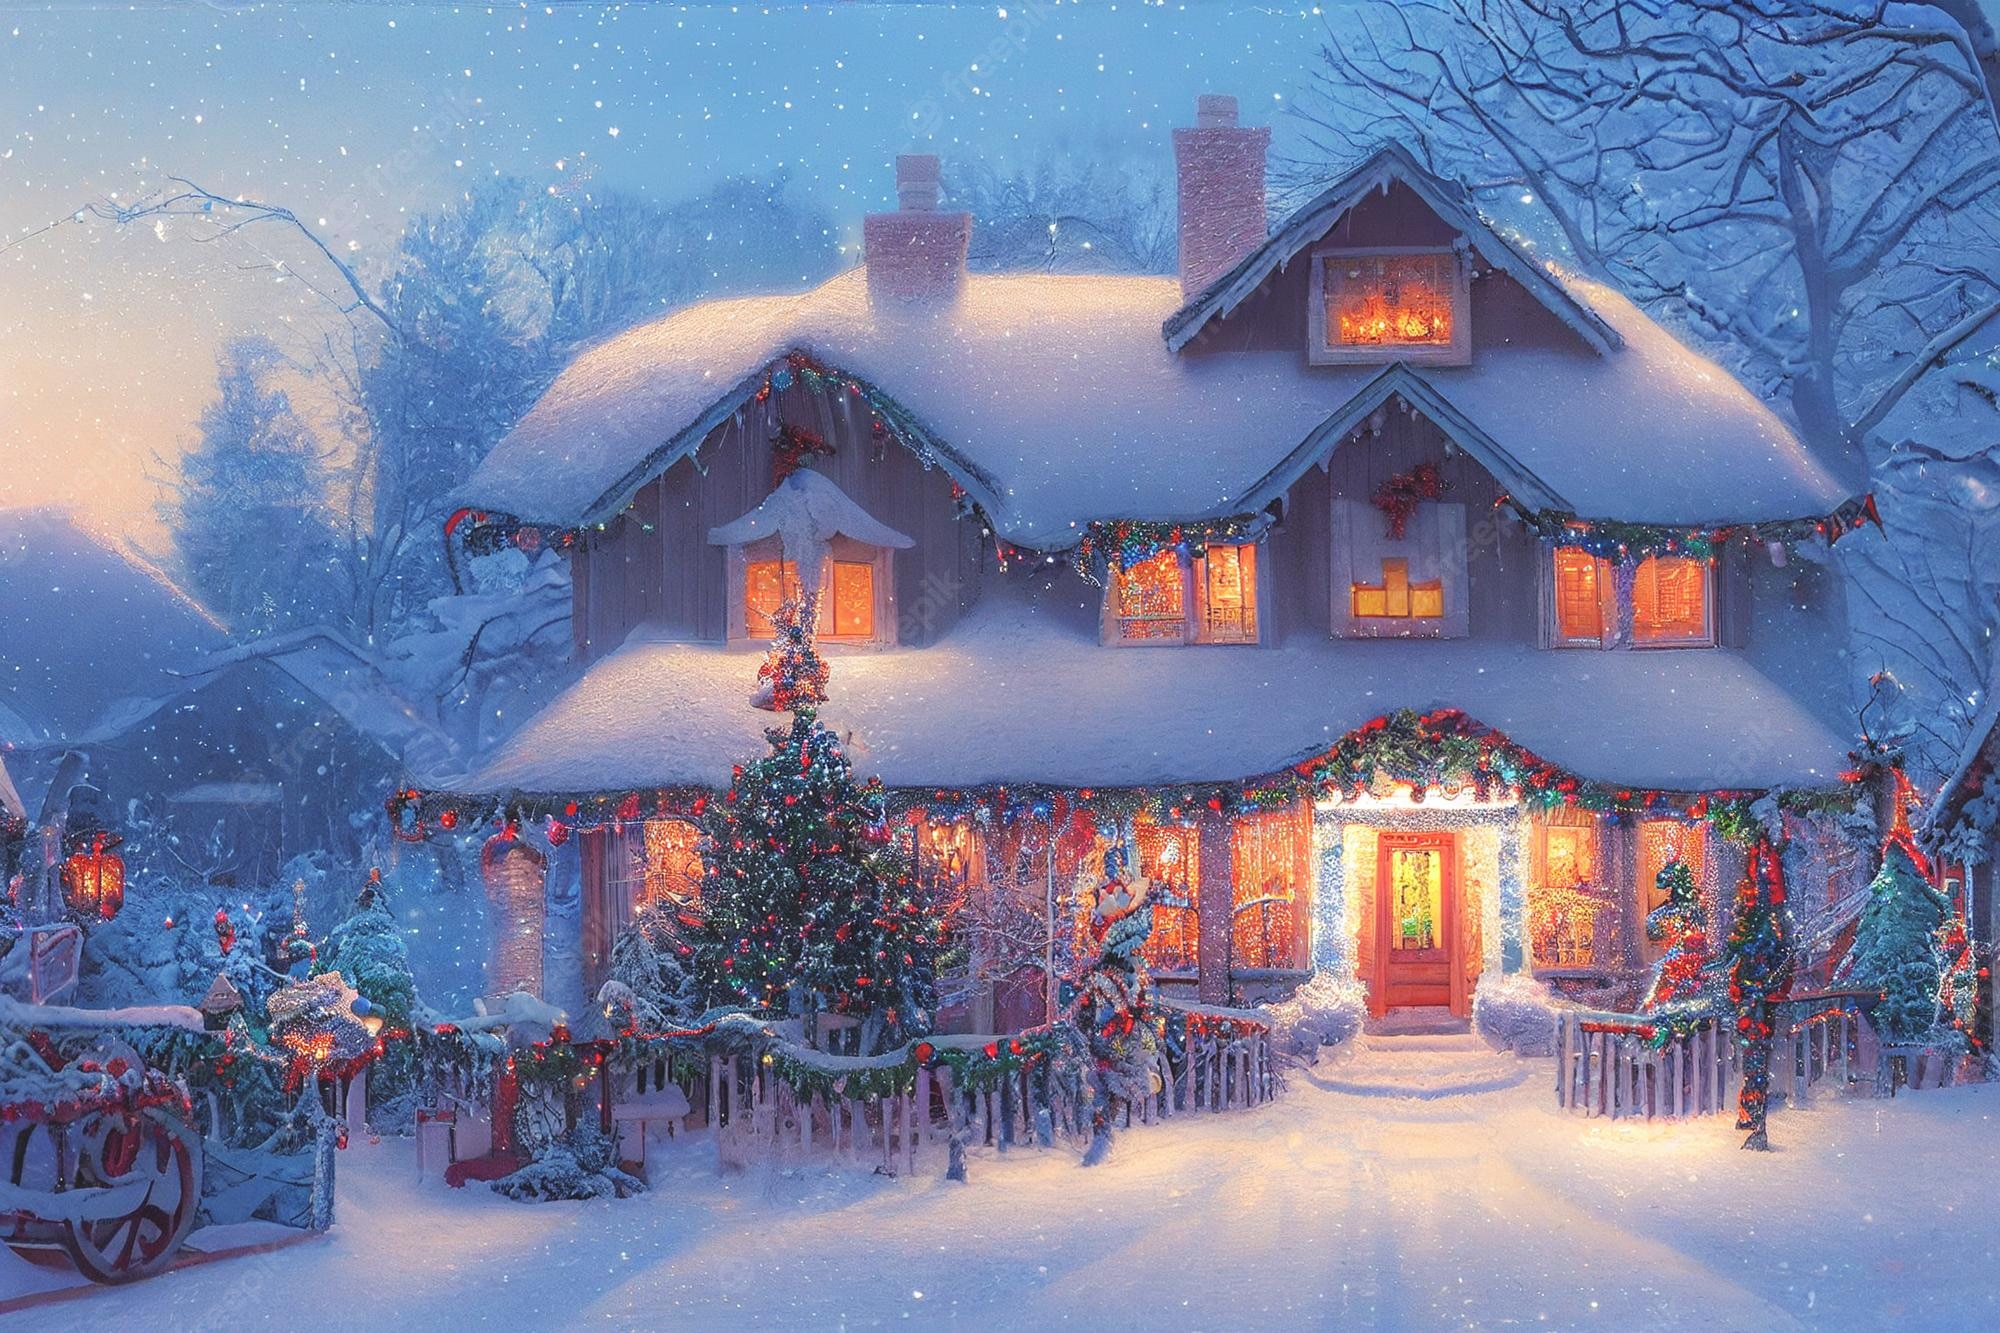 Premium Photod illustration of a christmas tree house with ornaments and colored lights surrounded